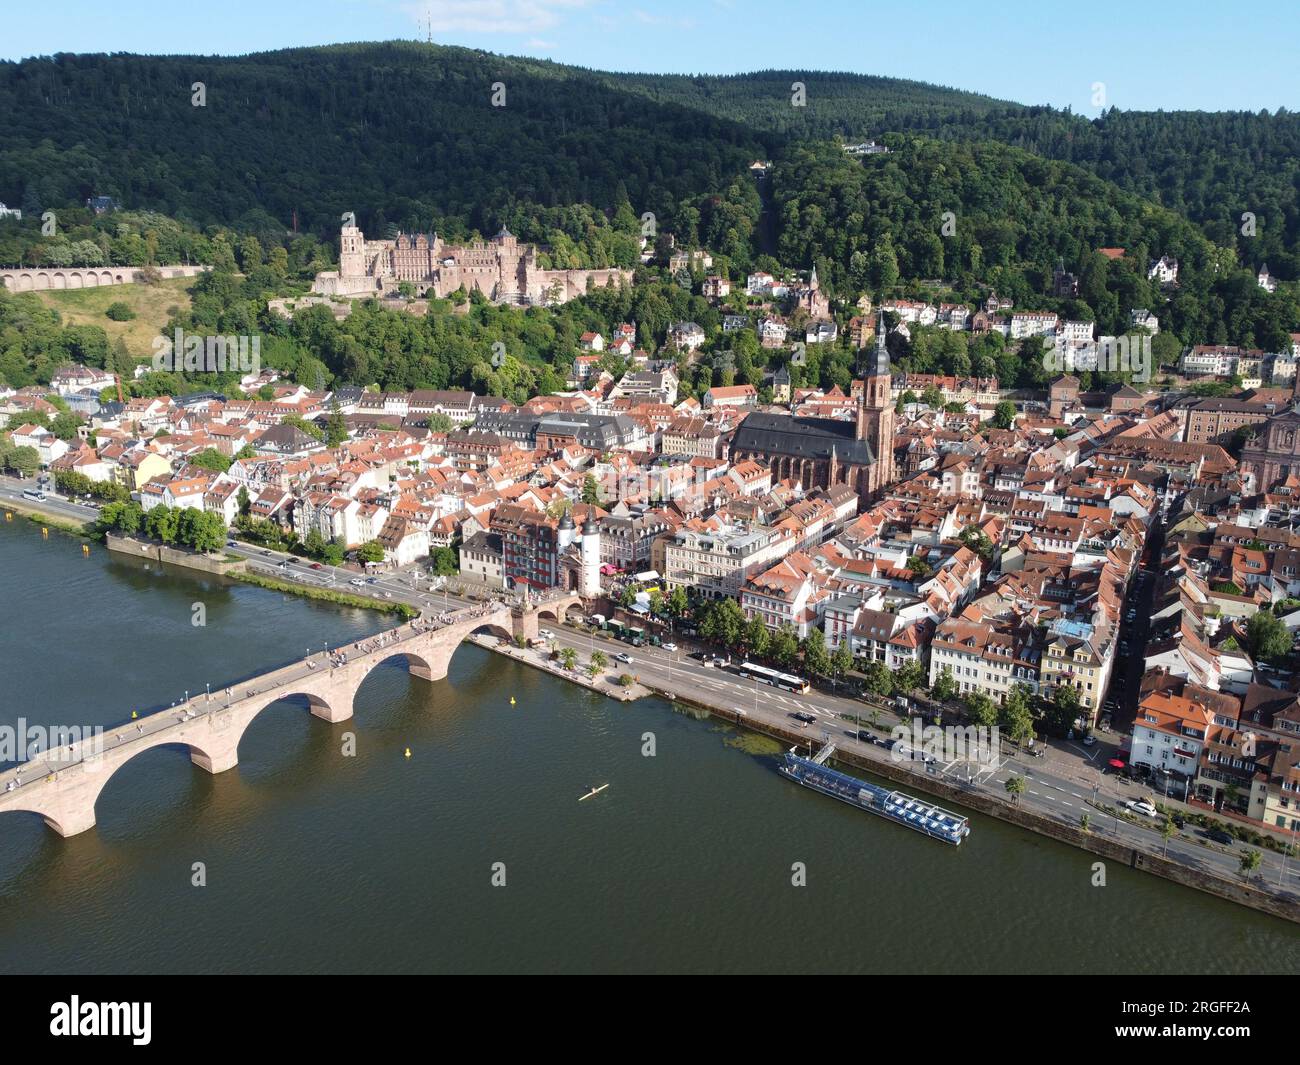 Aerial photograph of Heidelberg's old town, the Heiliggeistkirche church and old bridge, with the Castle in the background, Baden-Württemberg, Germany Stock Photo